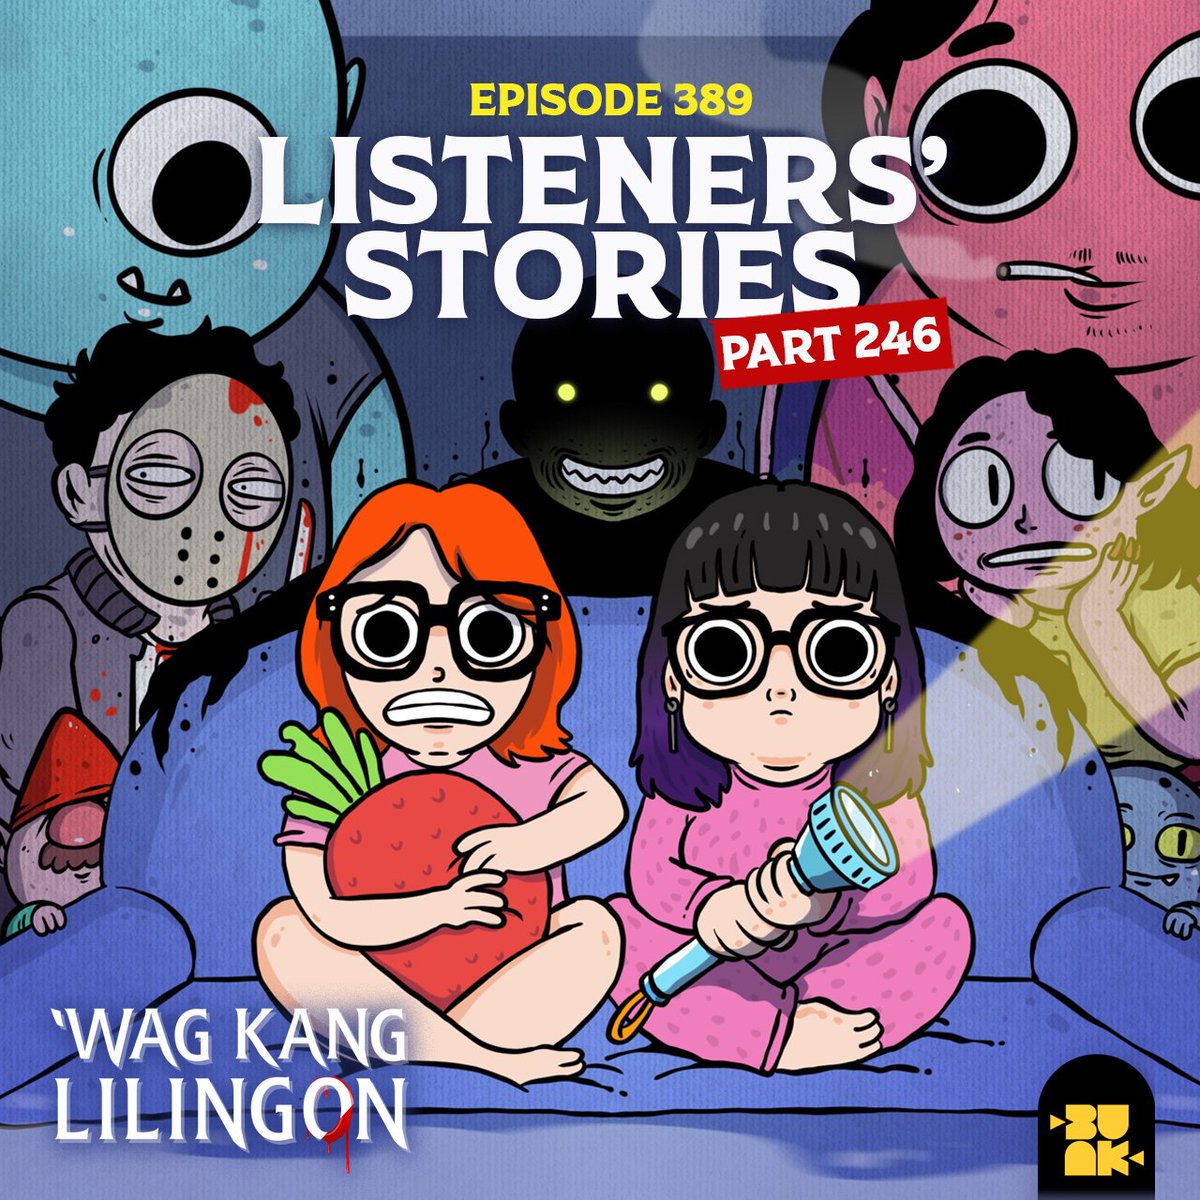 ✨️EPISODE 389: Listeners' Stories Part 246✨️ Sweet dreams aren't made of these. 🎧 tinyurl.com/y47hs5d3 #WagKangLilingon #HorrorPodcast